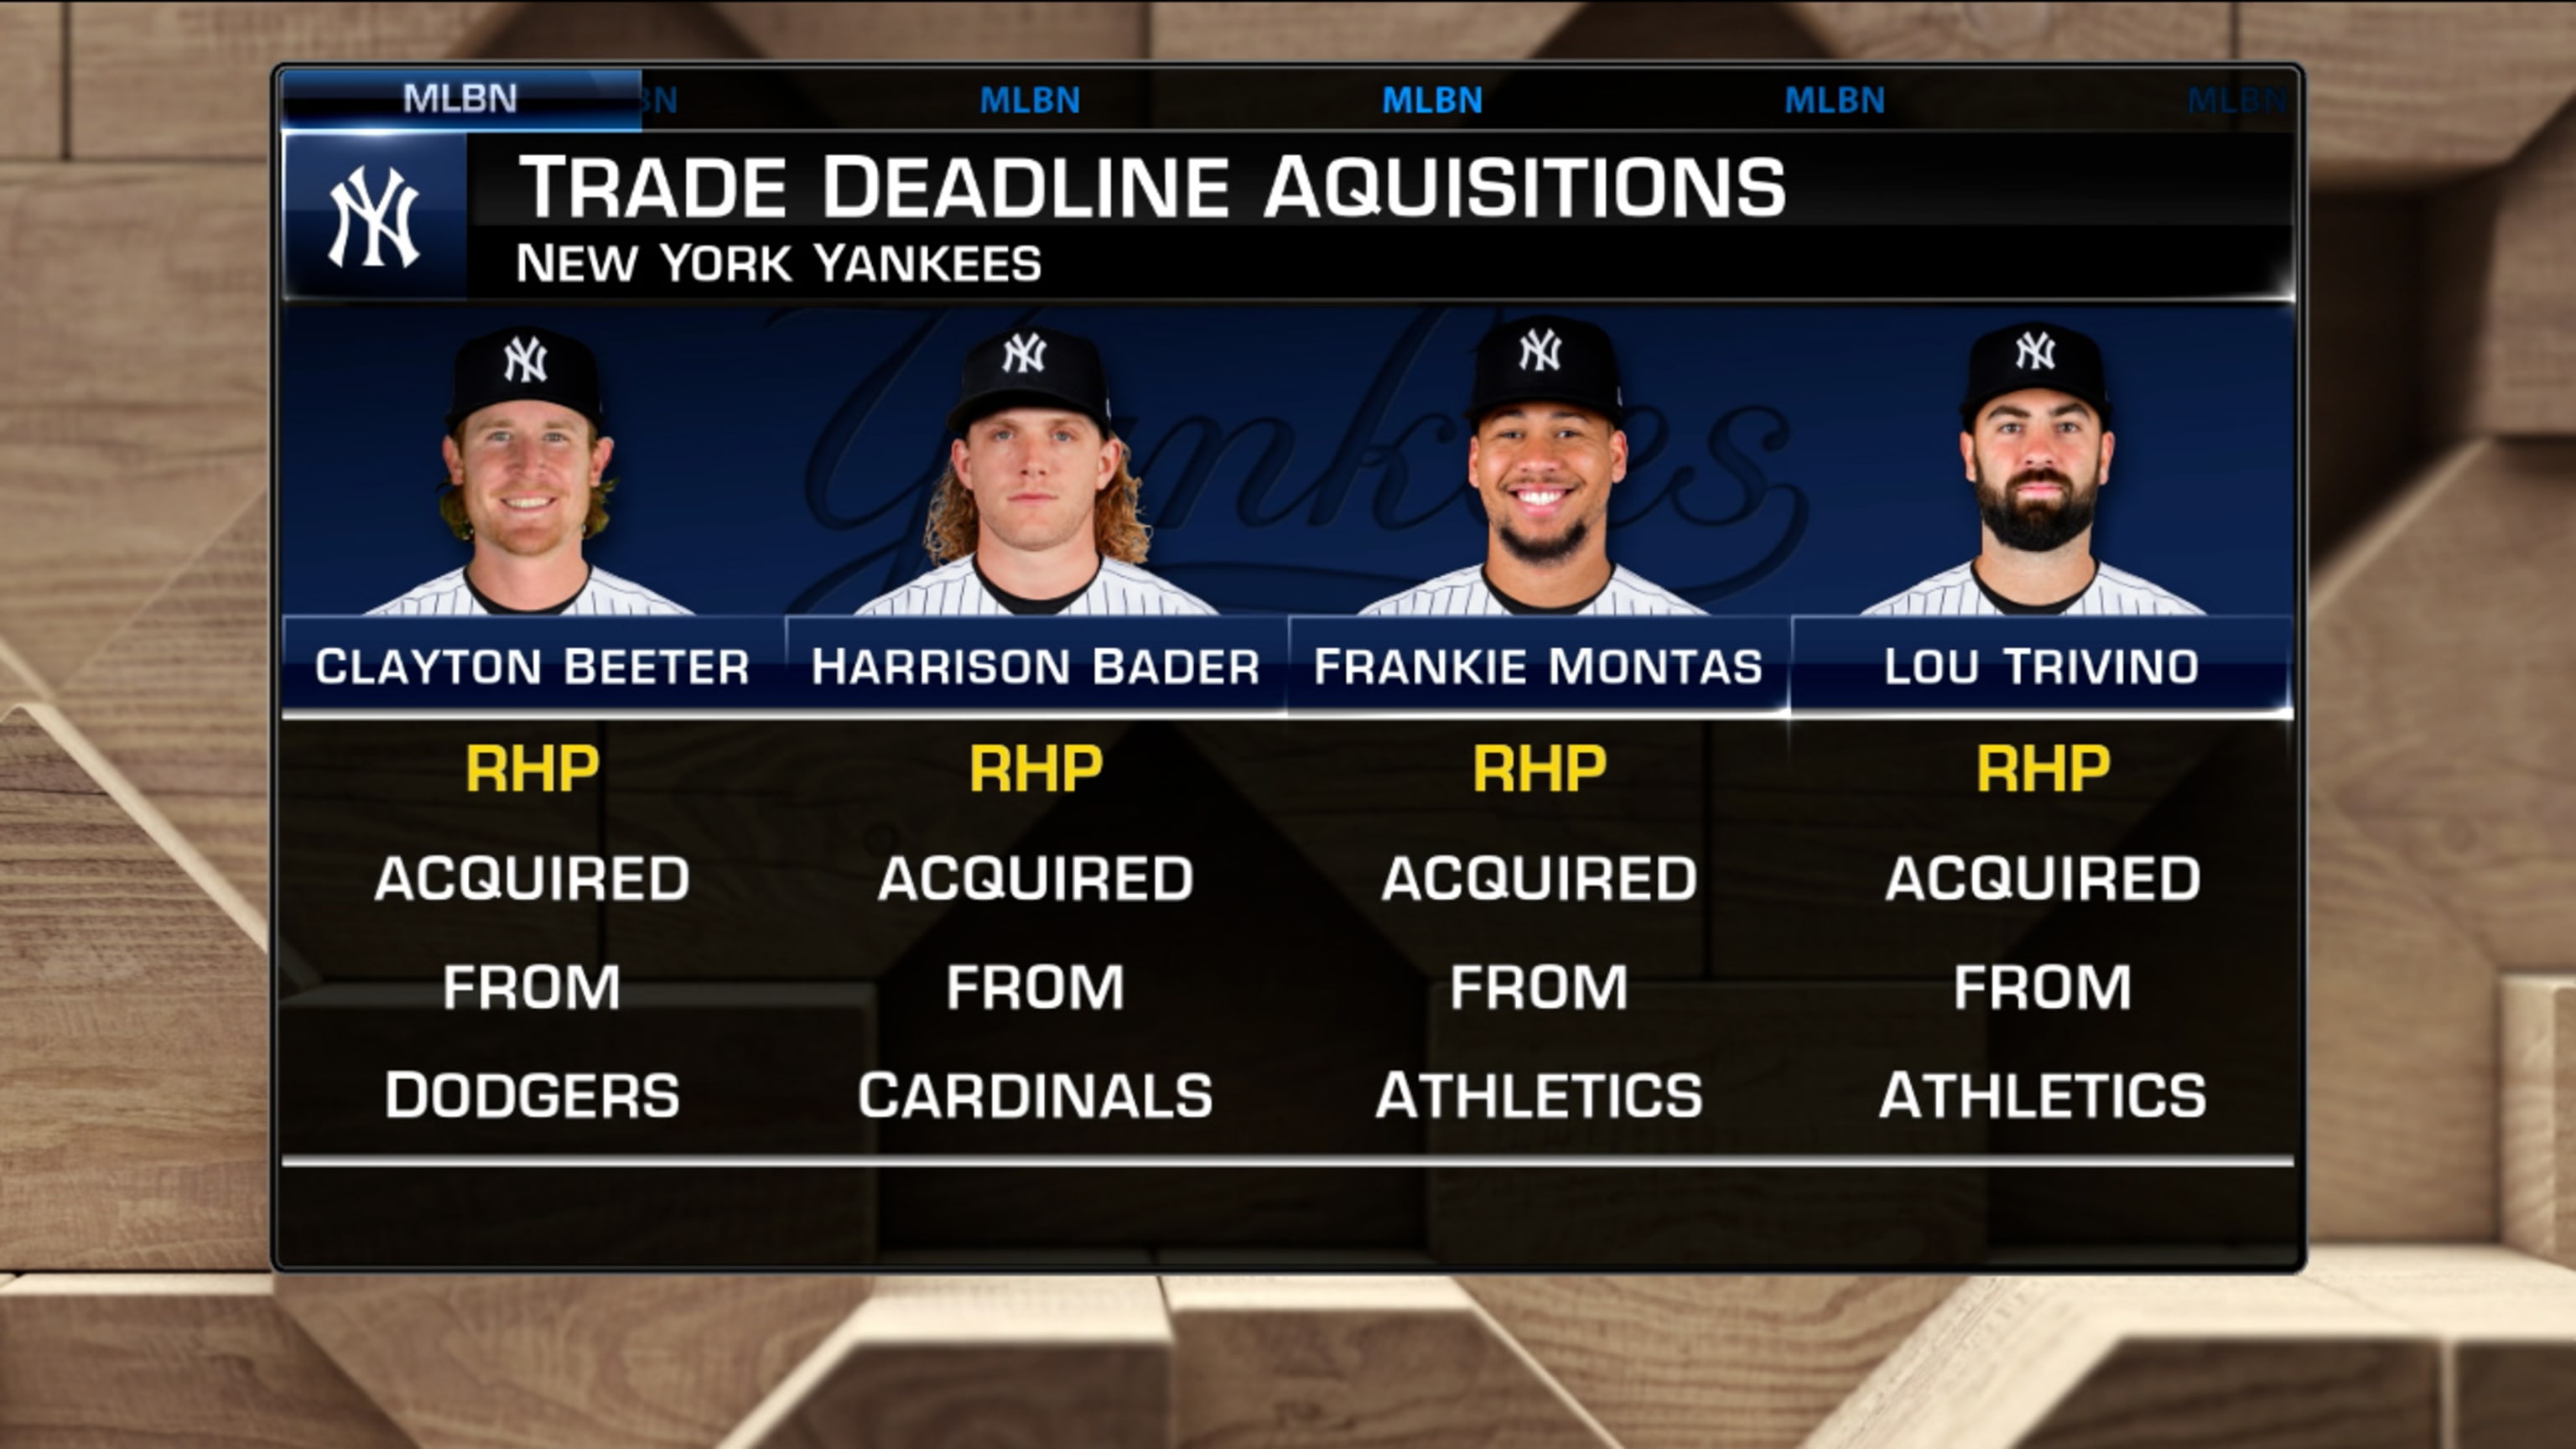 MLB on FOX - TRADE: The New York Yankees are acquiring